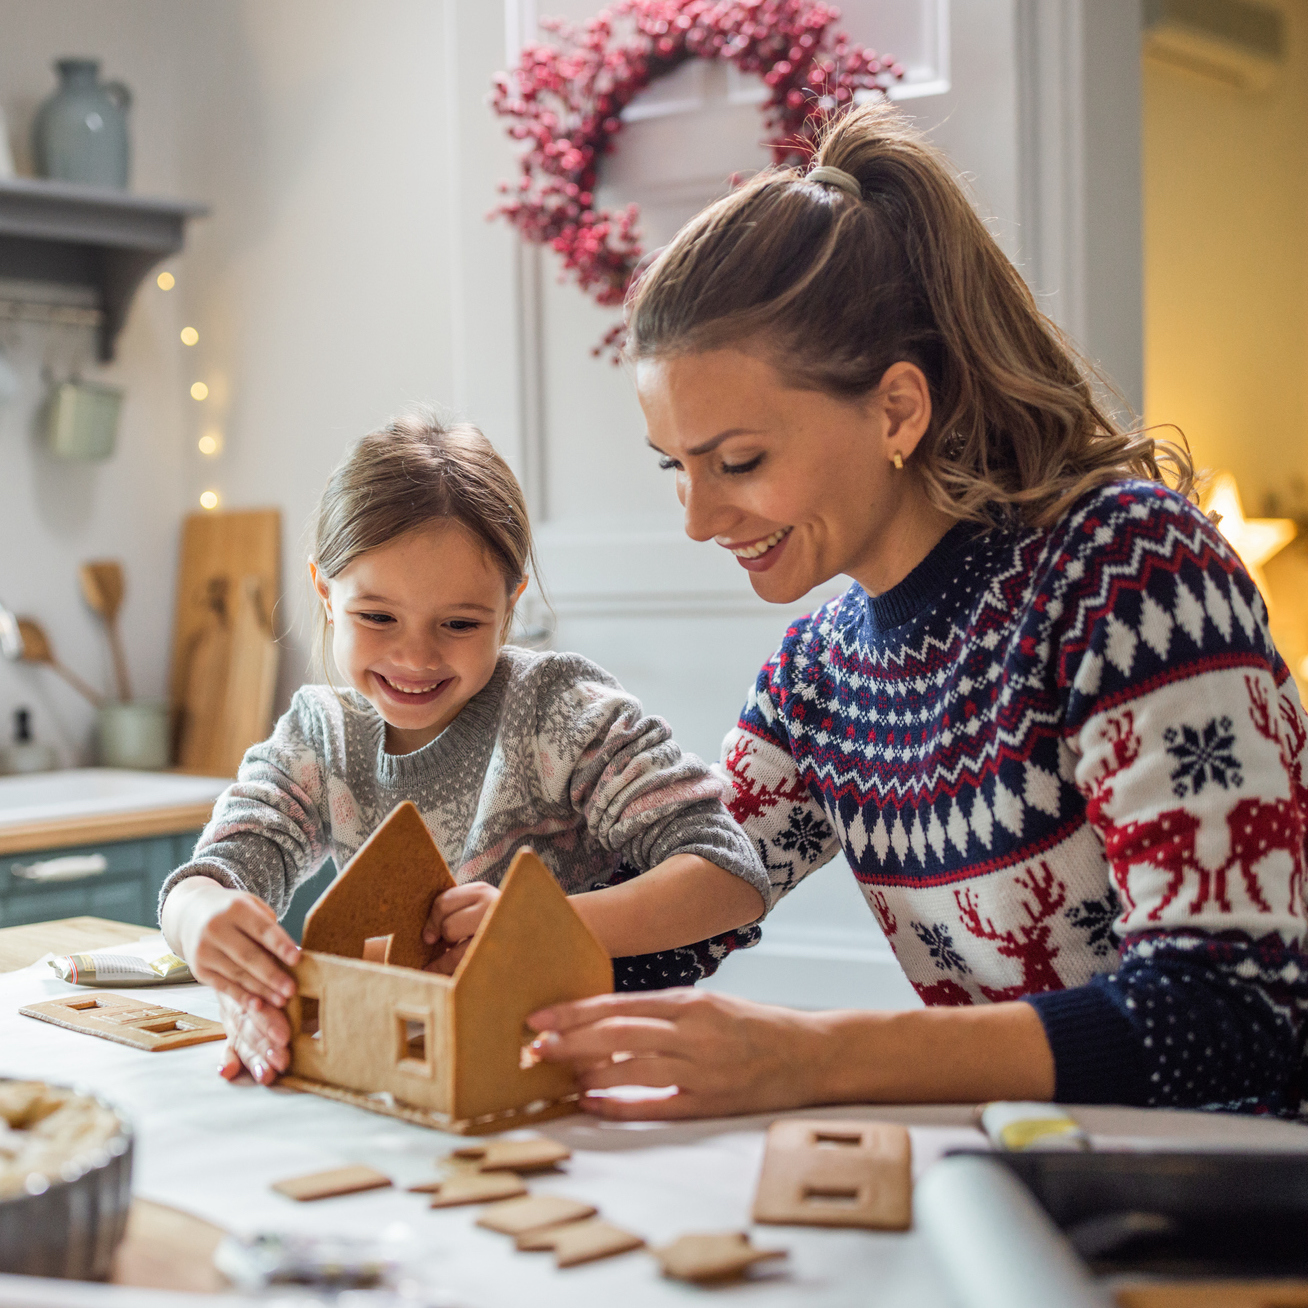 Learn about activities you can do at home for some holiday fun.